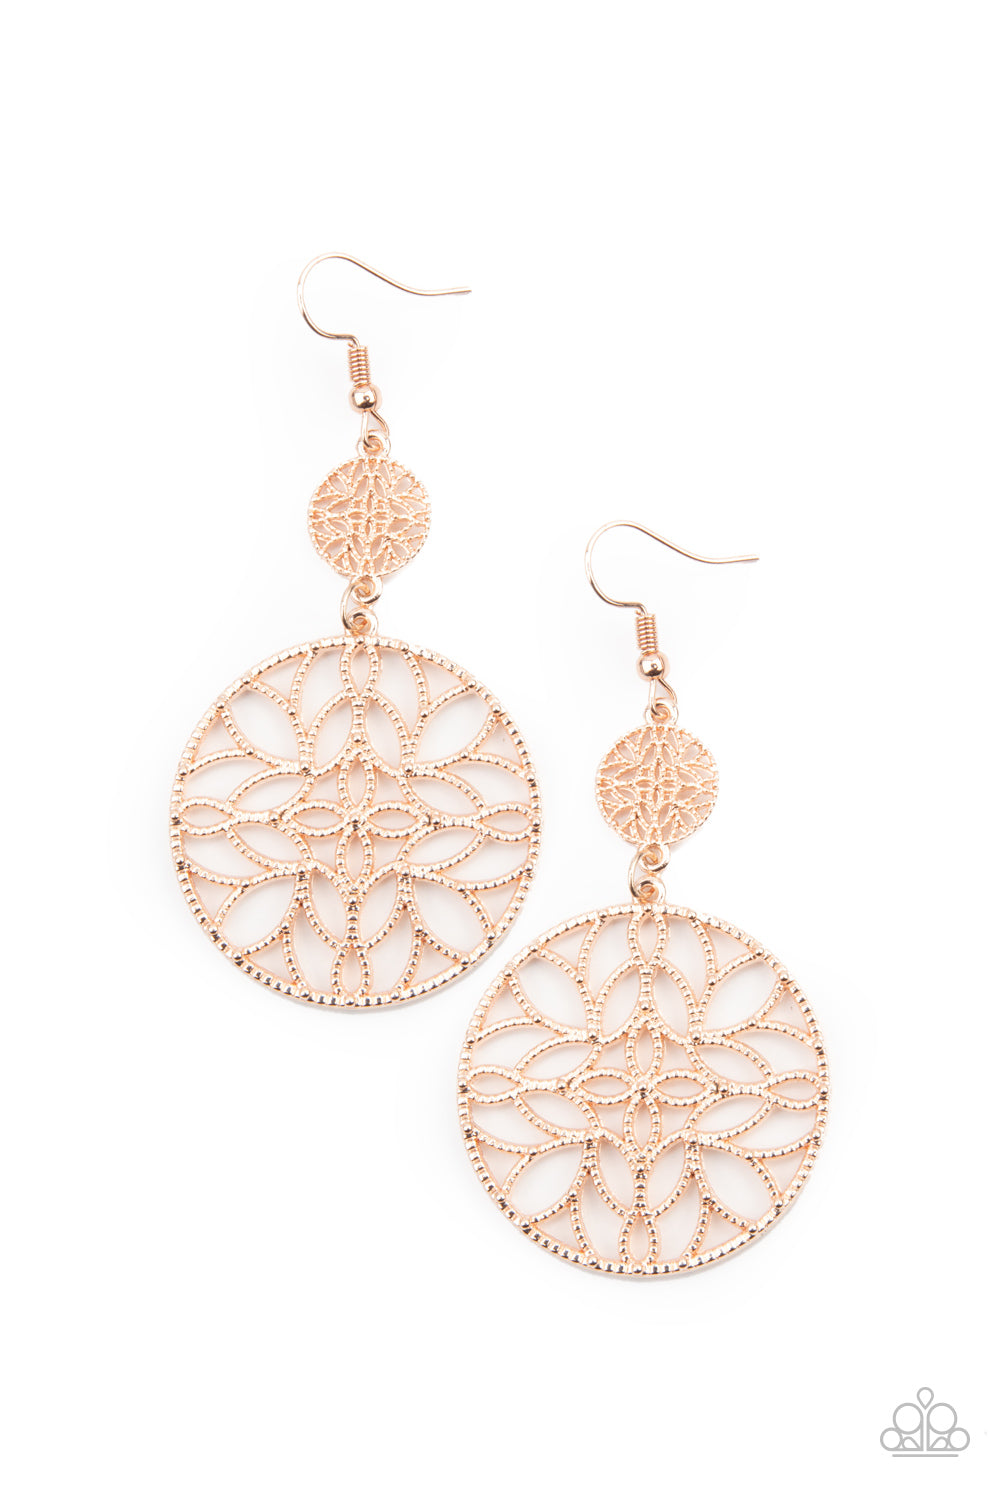 Featuring a stenciled mandala-like pattern, a studded rose gold frame swings from a dainty matching frame, creating a whimsical lure. Earring attaches to a standard fishhook fitting.